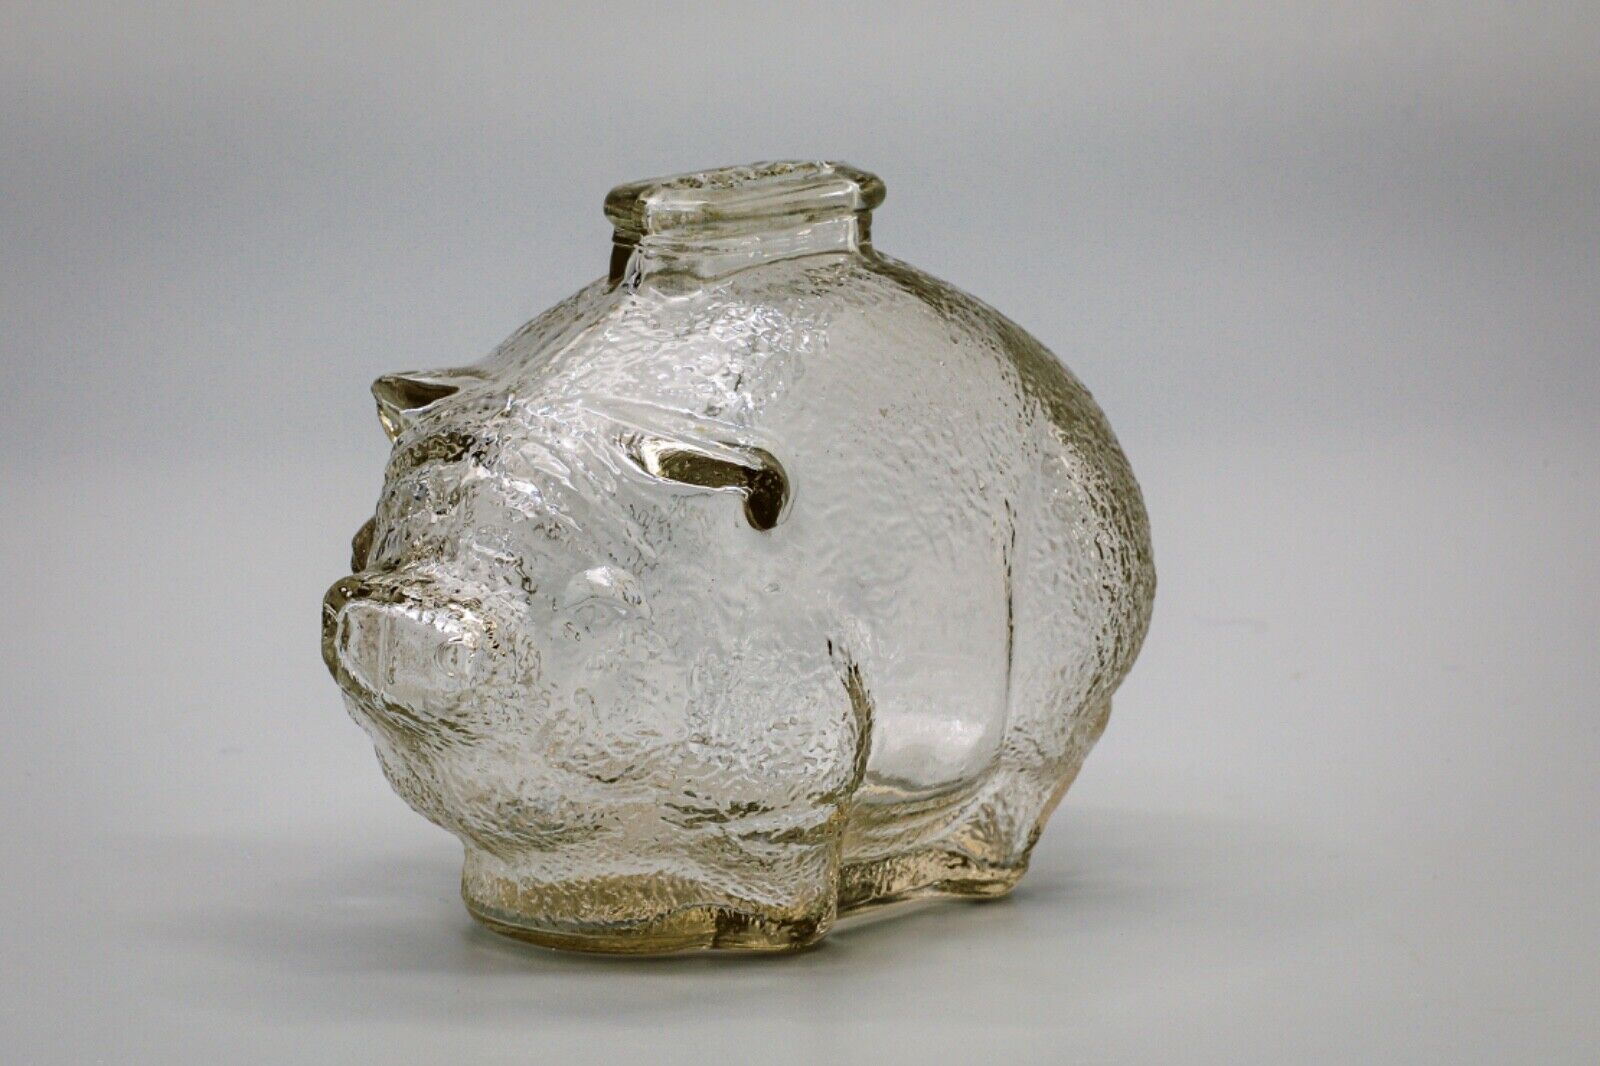 Vintage Textured Pig Coin Bank Clear Glass. 4.5 inch long piggy bank.